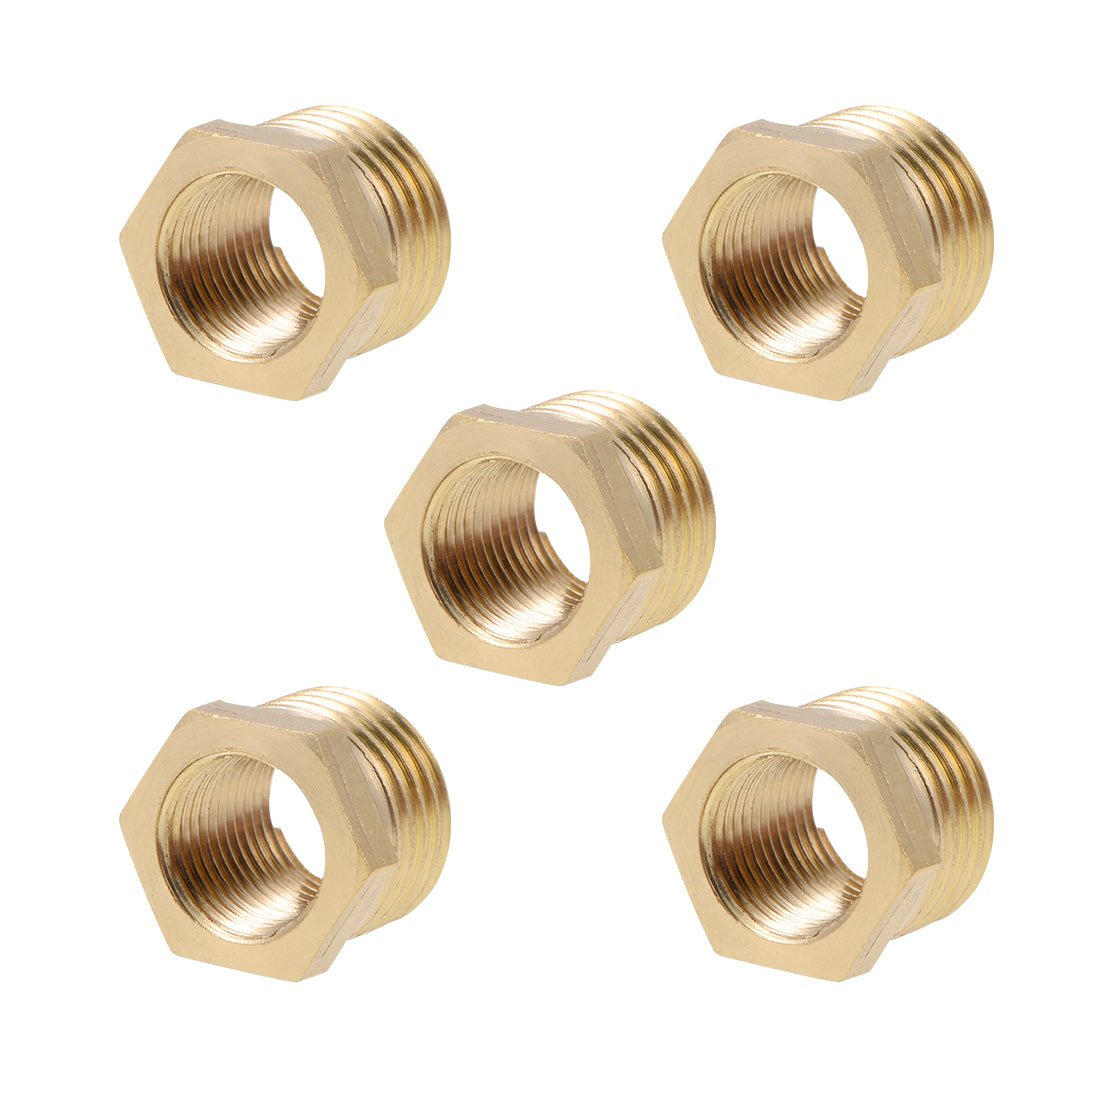 uxcell Uxcell Brass Threaded Pipe Fitting G1/4 Male x G1/8 Female Hex Bushing Adapter 5pcs